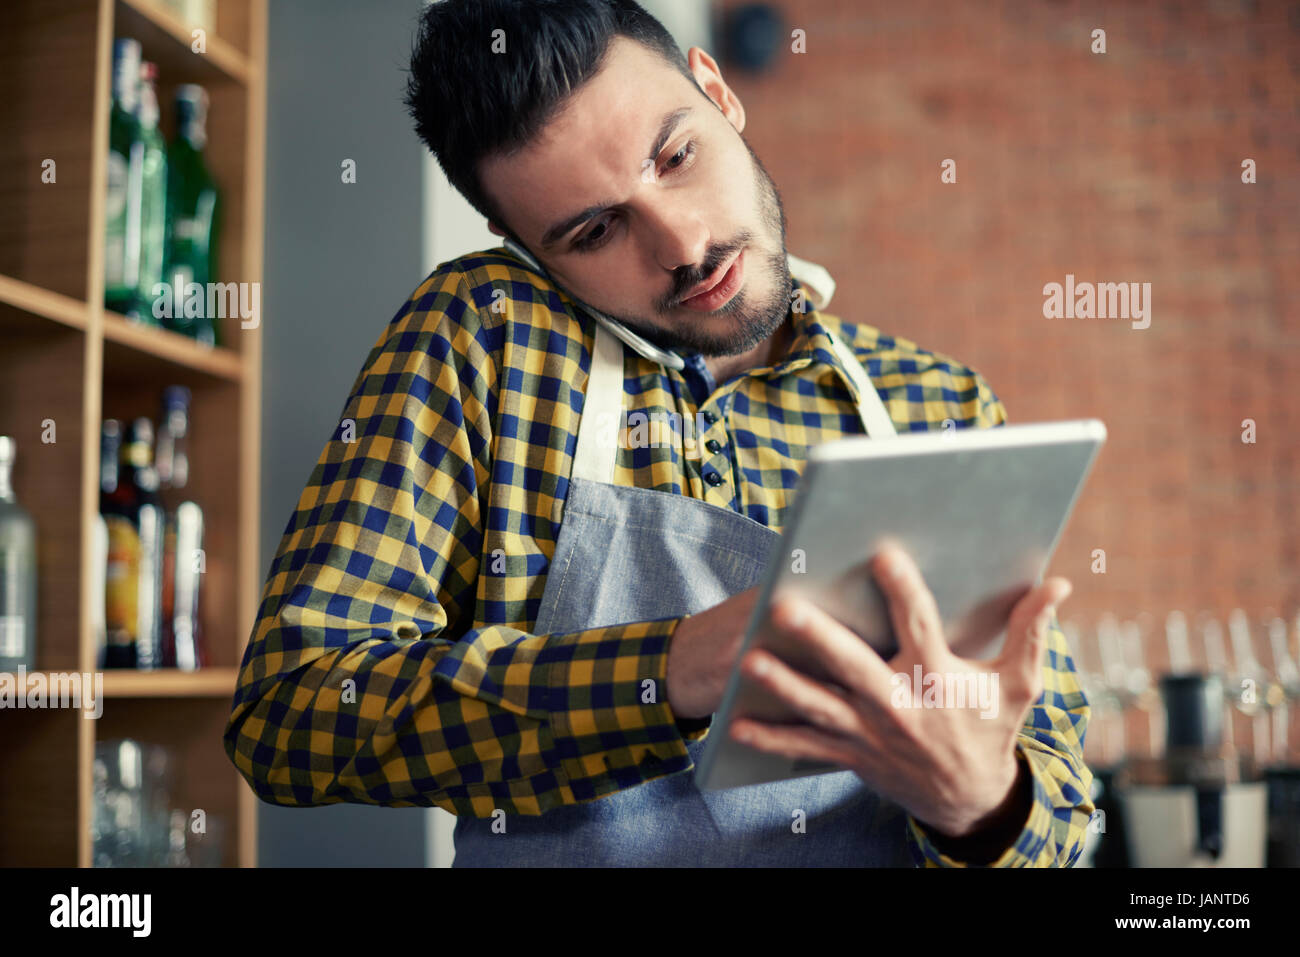 Waiter using smart phone and digital tablet Stock Photo